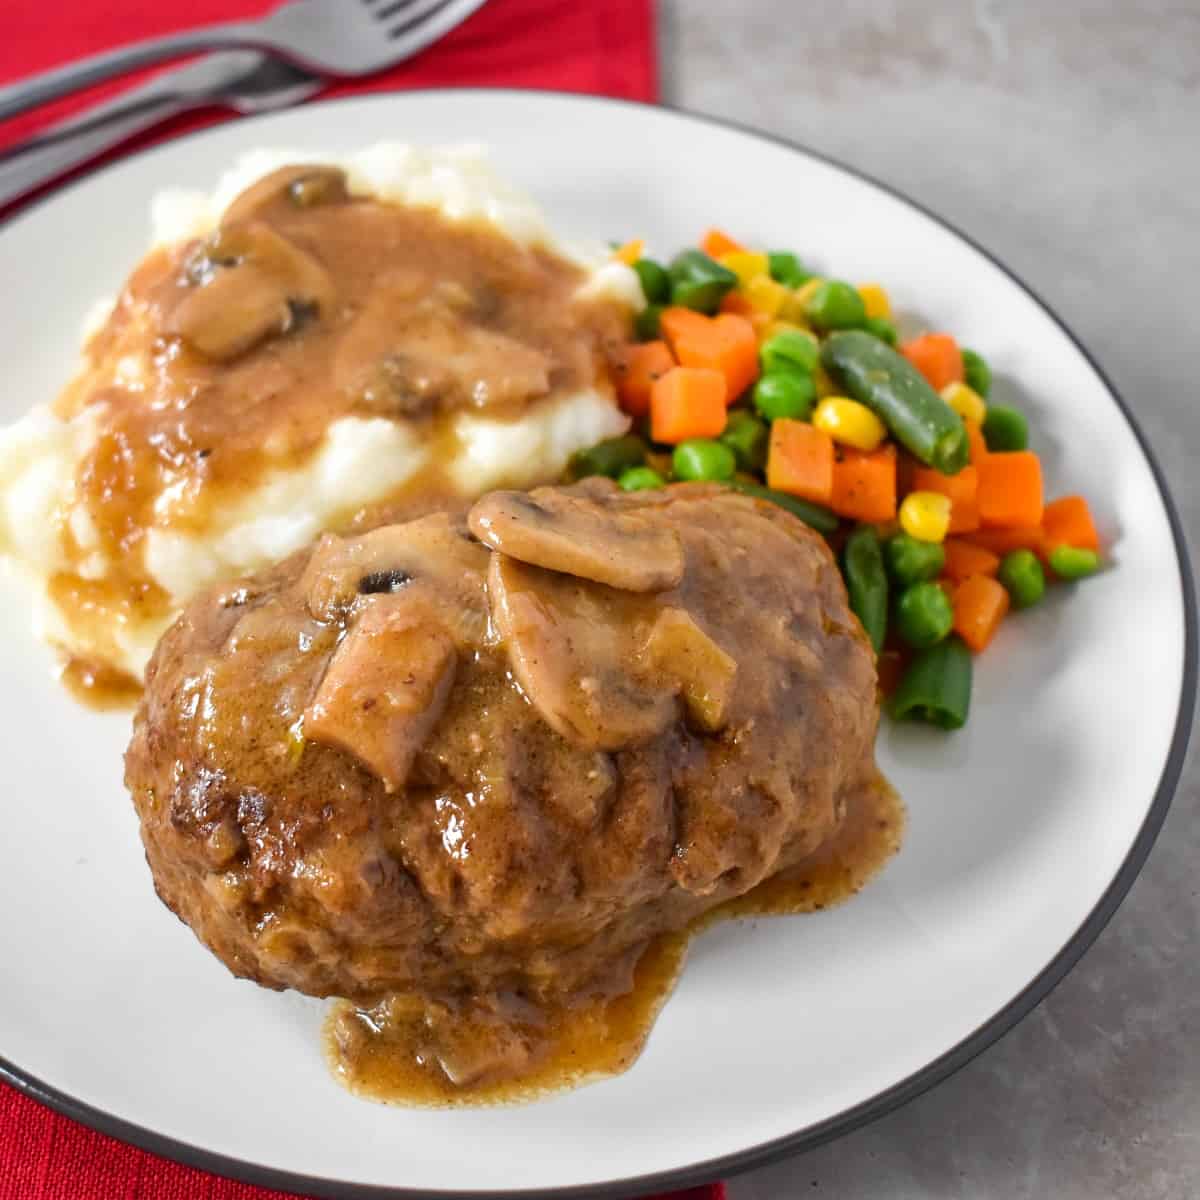 A close up of the Salisbury steak topped with the gravy and served with mashed potatoes and mixed vegetables on a white plate.